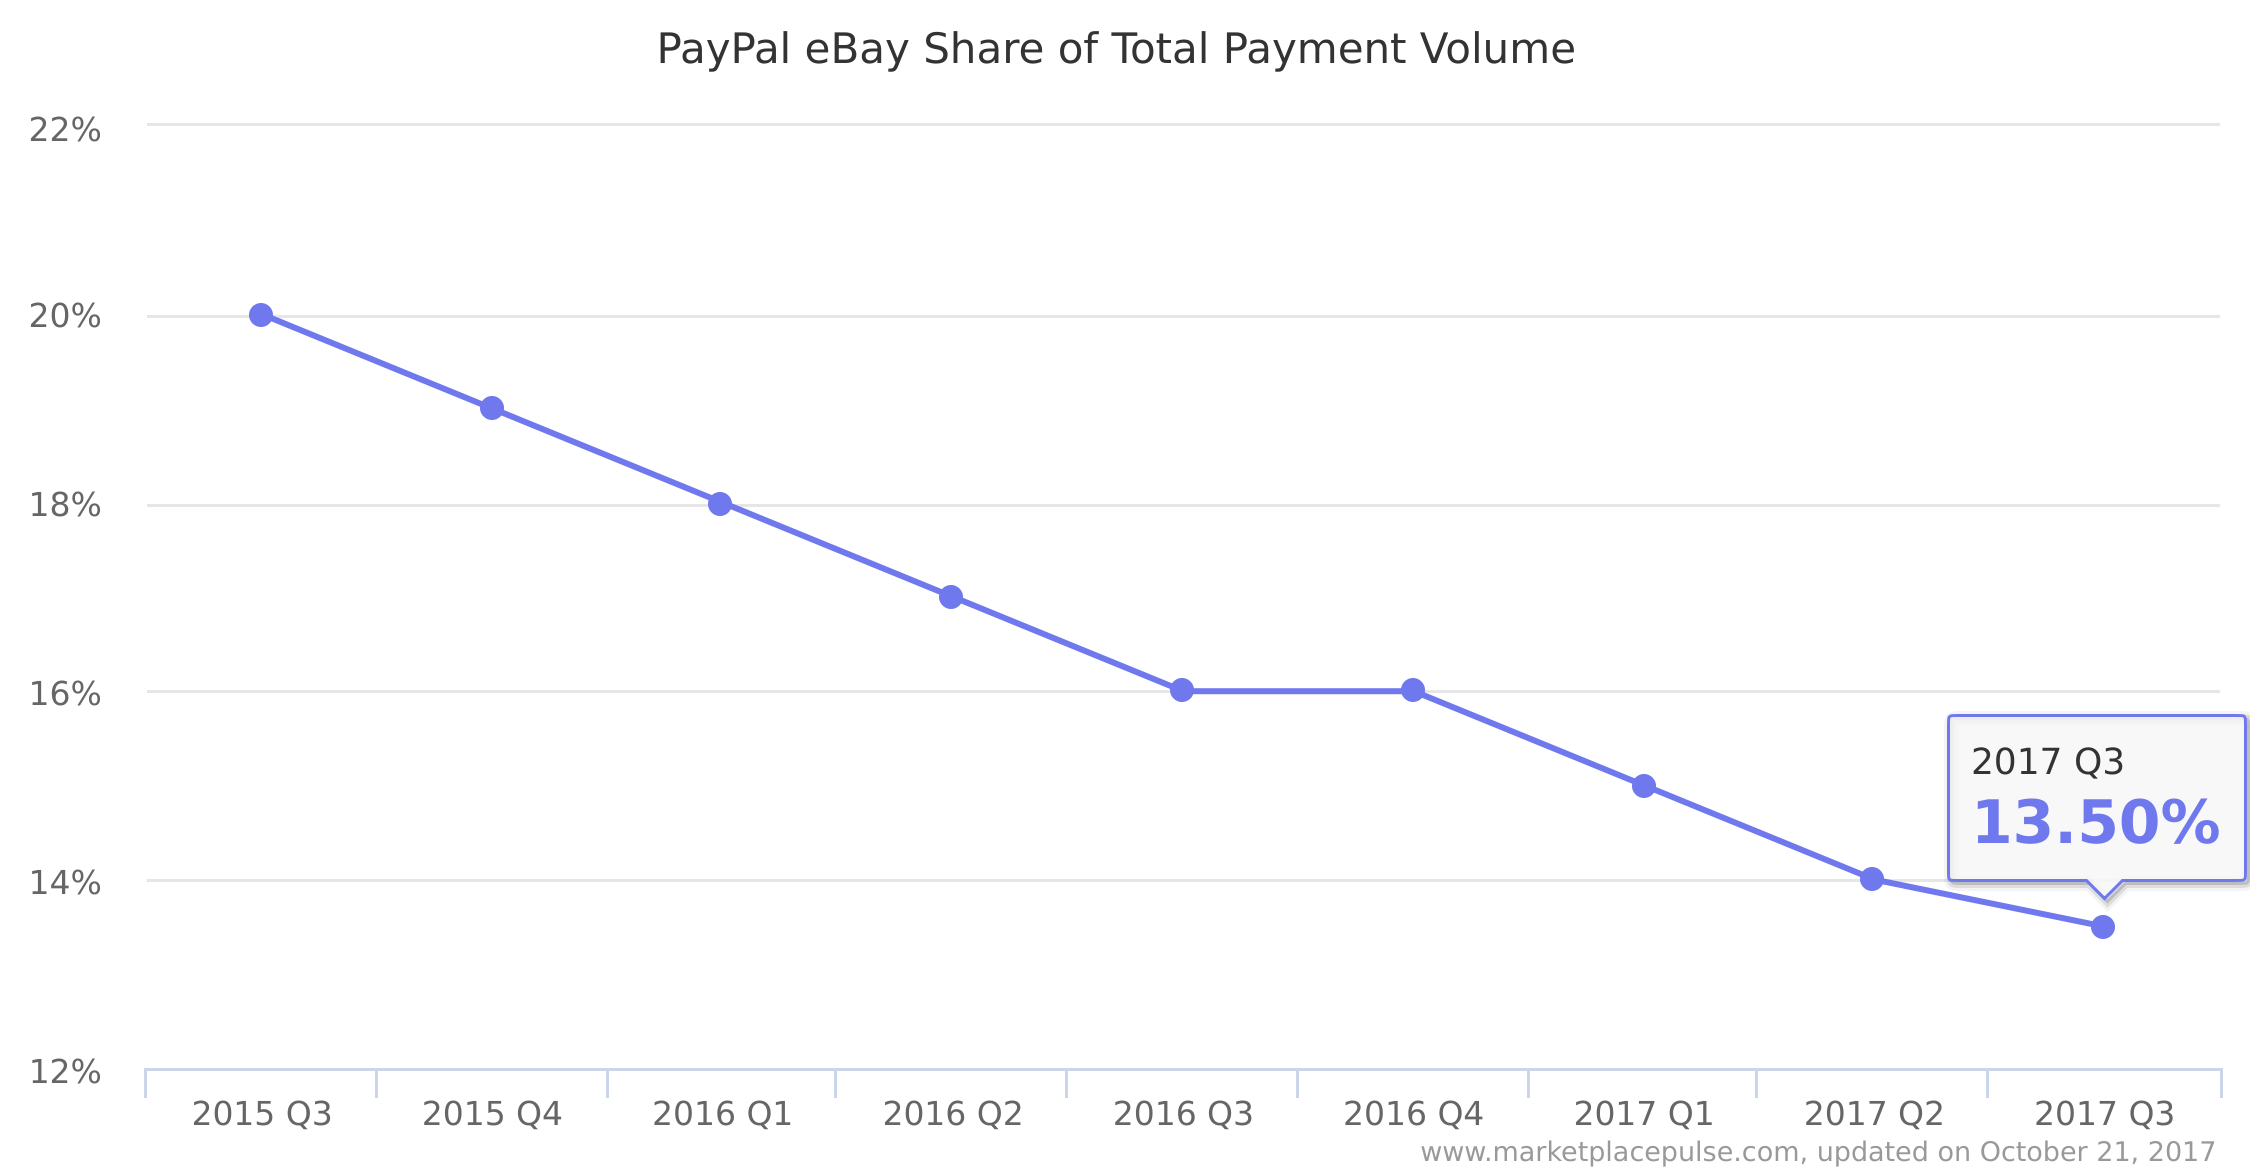 PayPal eBay share of total payment volume